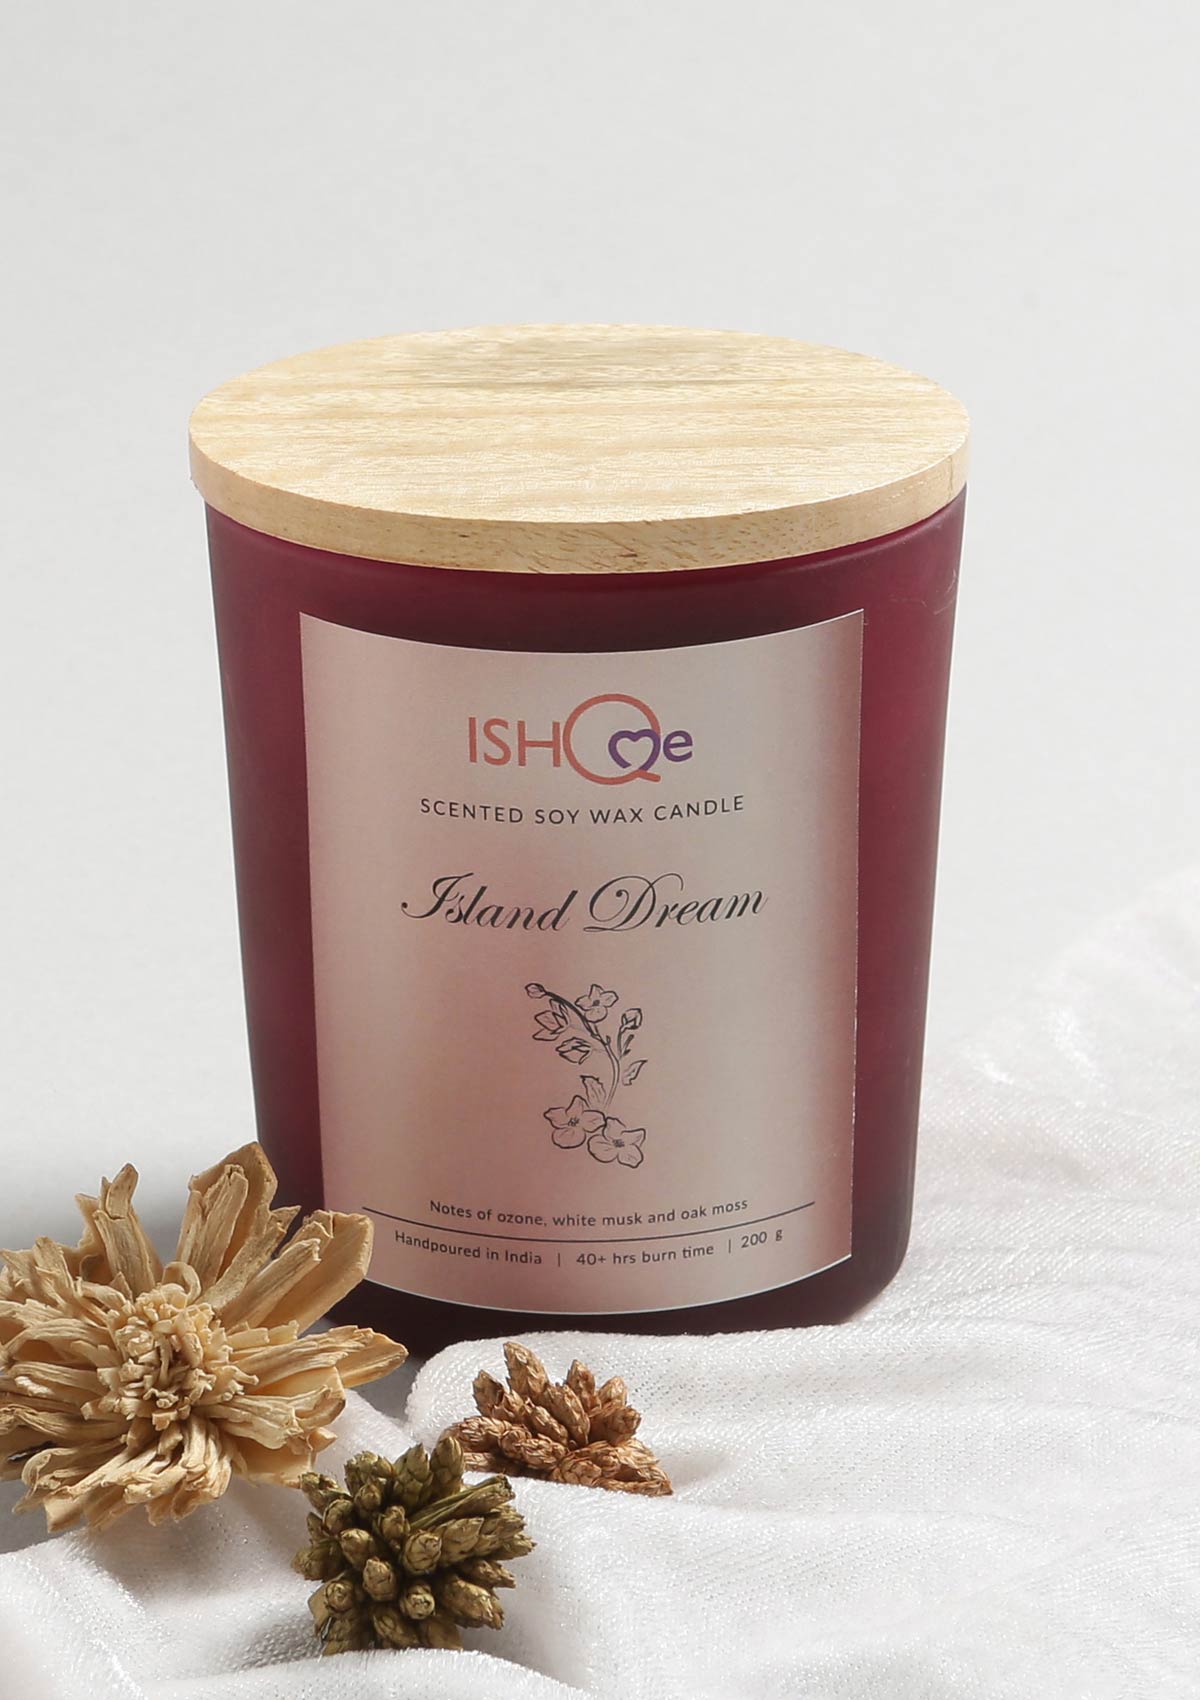 IshqME Scented Dreams Combo: Electric Diffuser & Island Dream Scented Candle - IshqMe